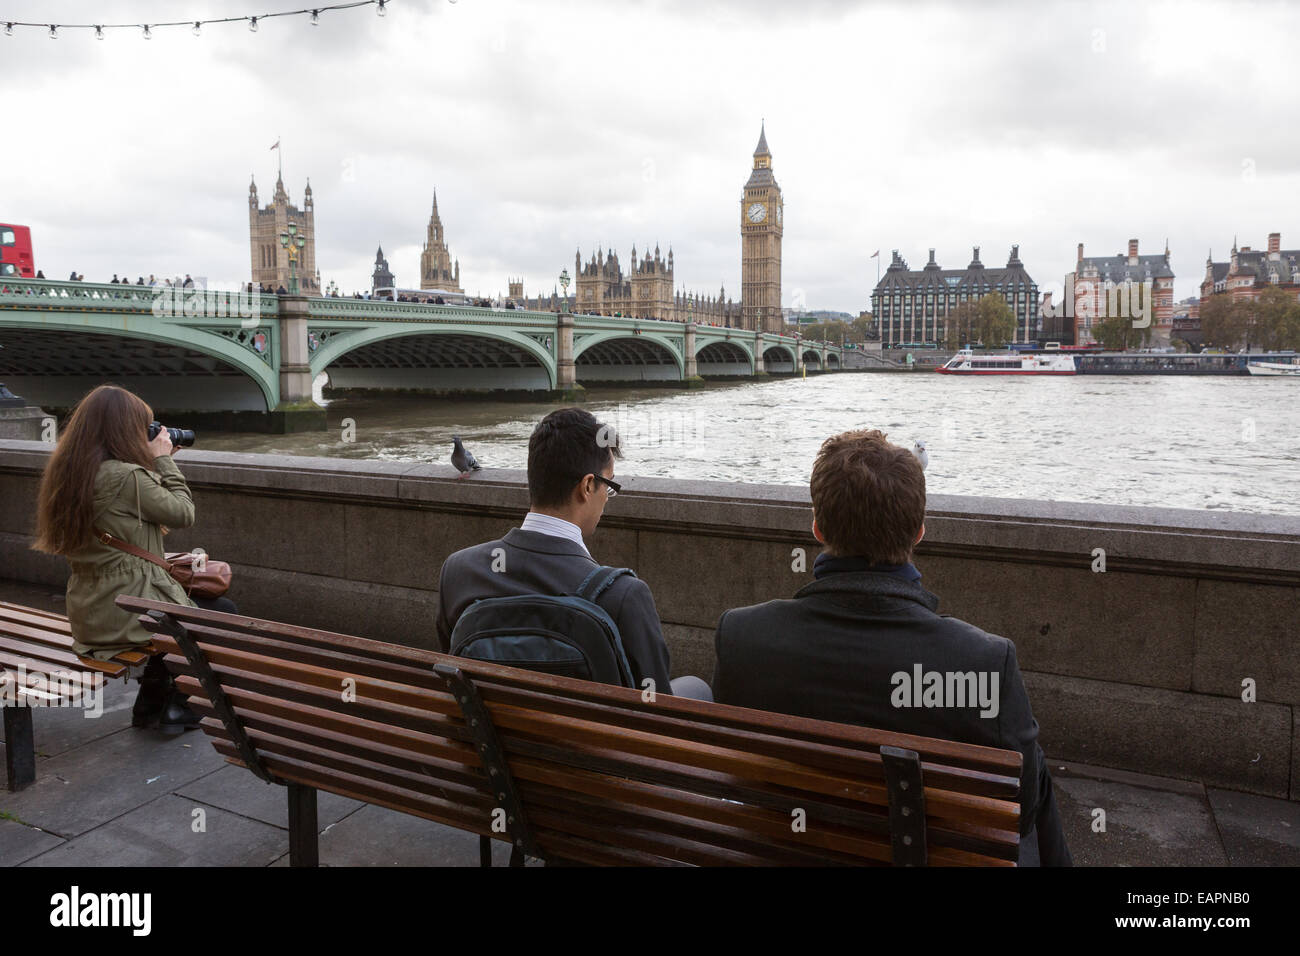 Two business men in suits and one female tourist sit on benches on next to the River Thames, opposite the Palace of Westminster Stock Photo